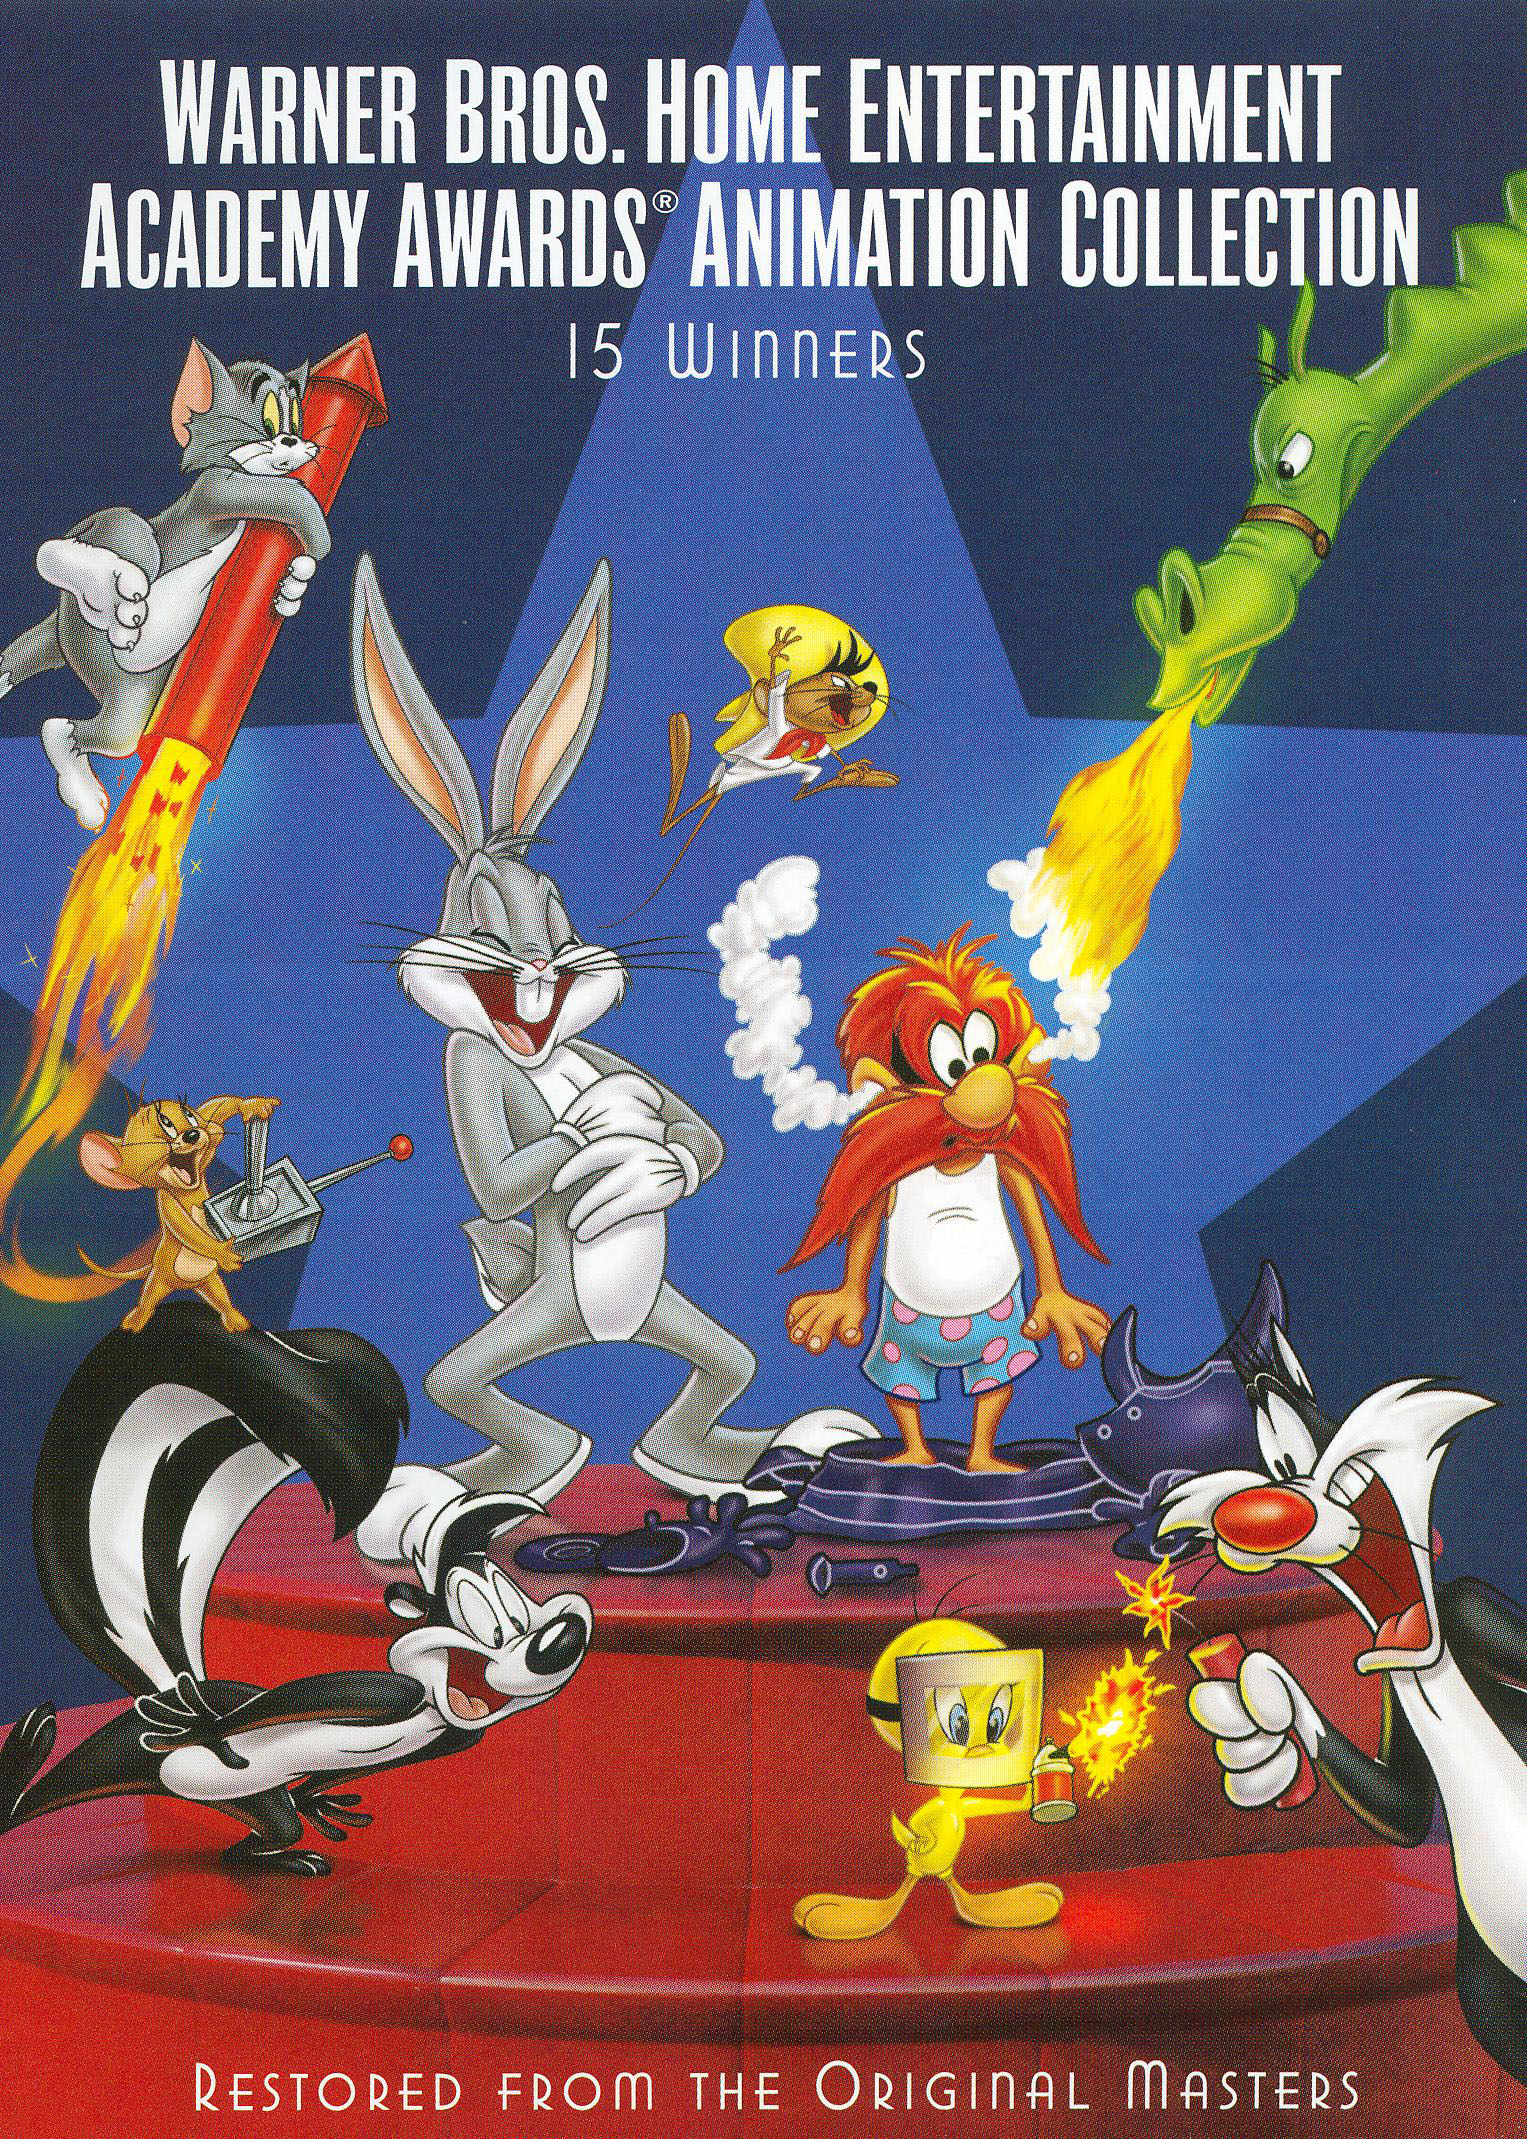 Warner Bros. Academy Awards Animation Collection 15 Winners [DVD